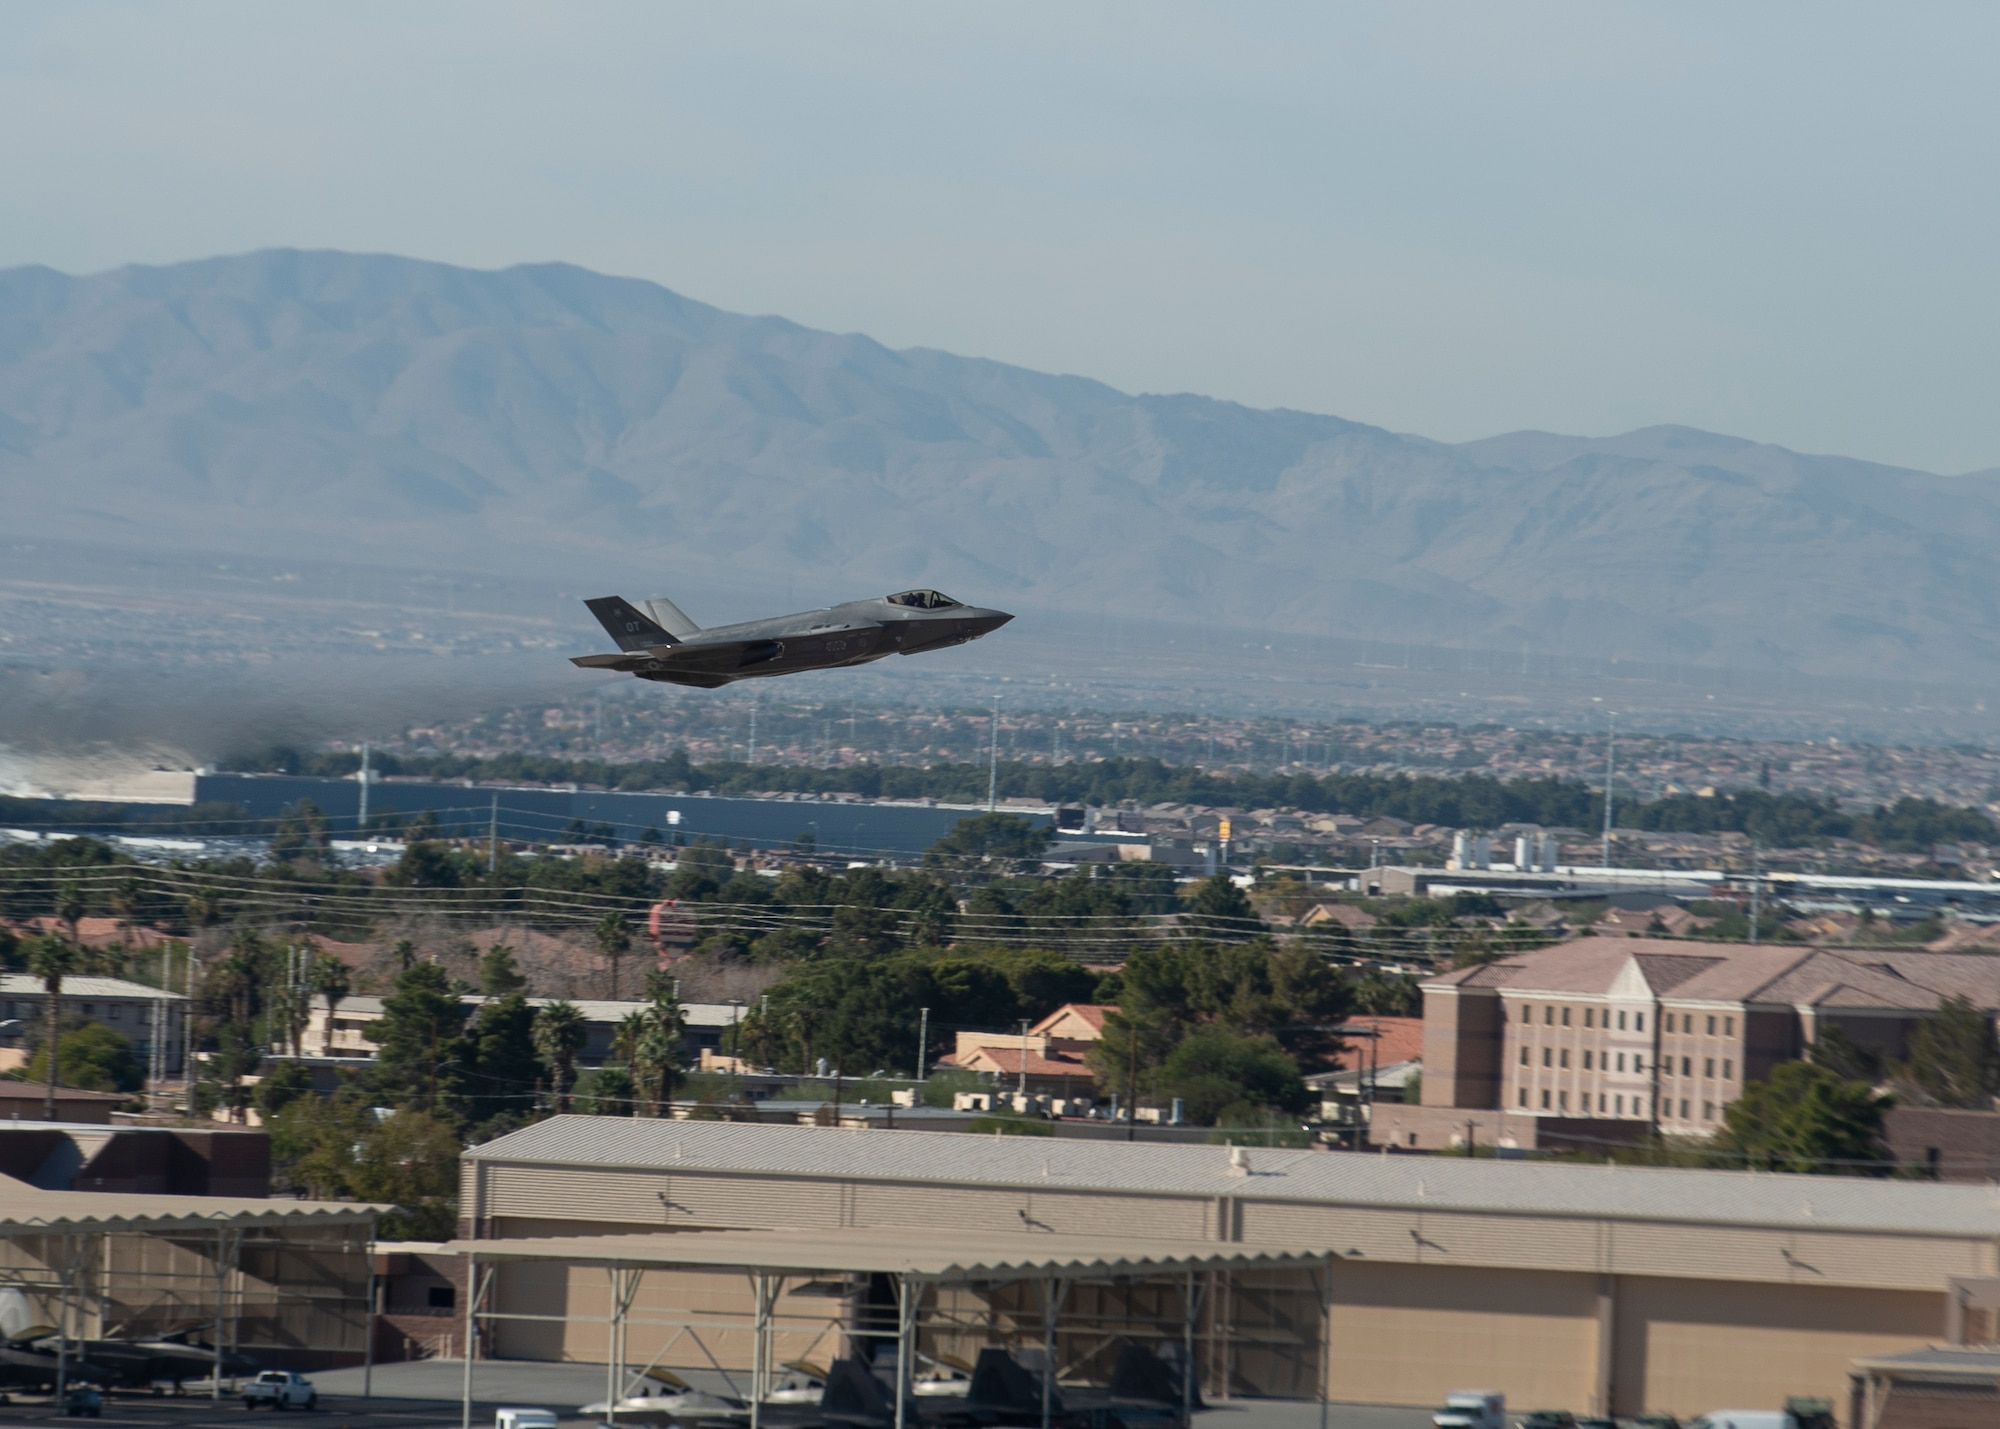 F-35 taking off over buildings